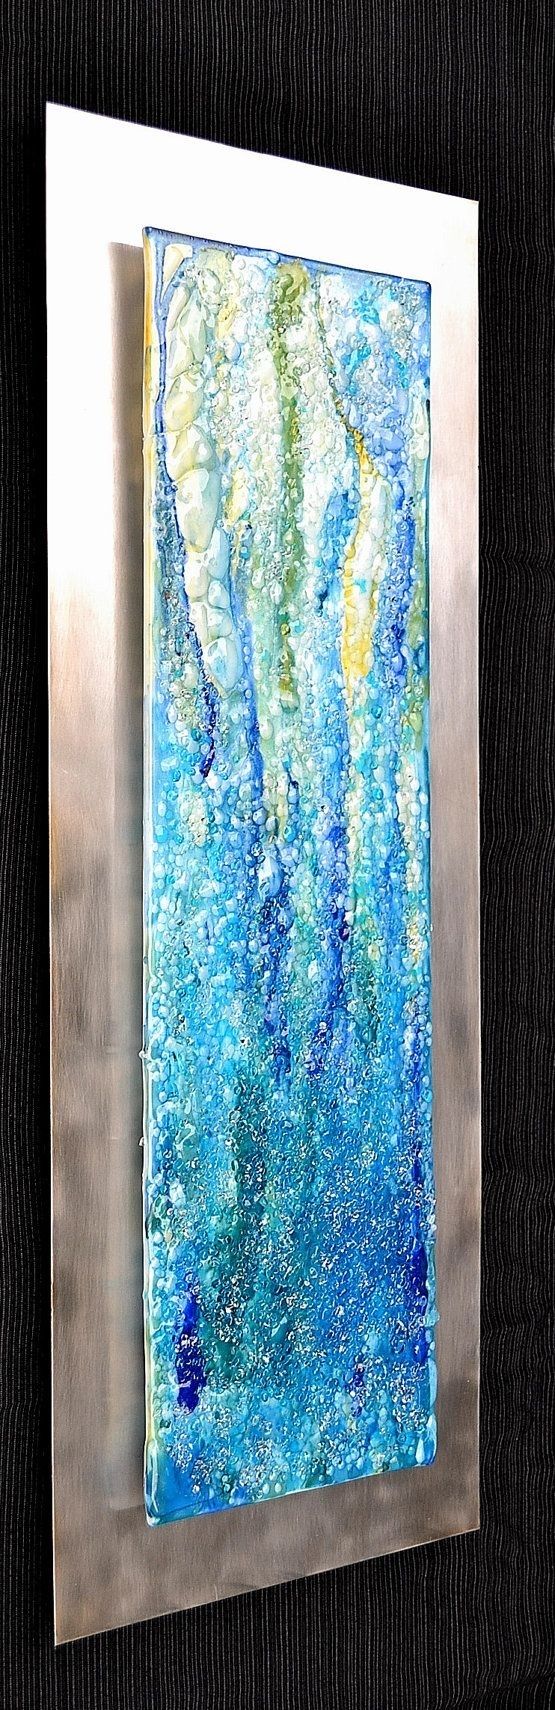 Fused Glass Wall Art "blue Rainforest" | Designer Glass Mosaics Inside Newest Abstract Fused Glass Wall Art (View 3 of 20)